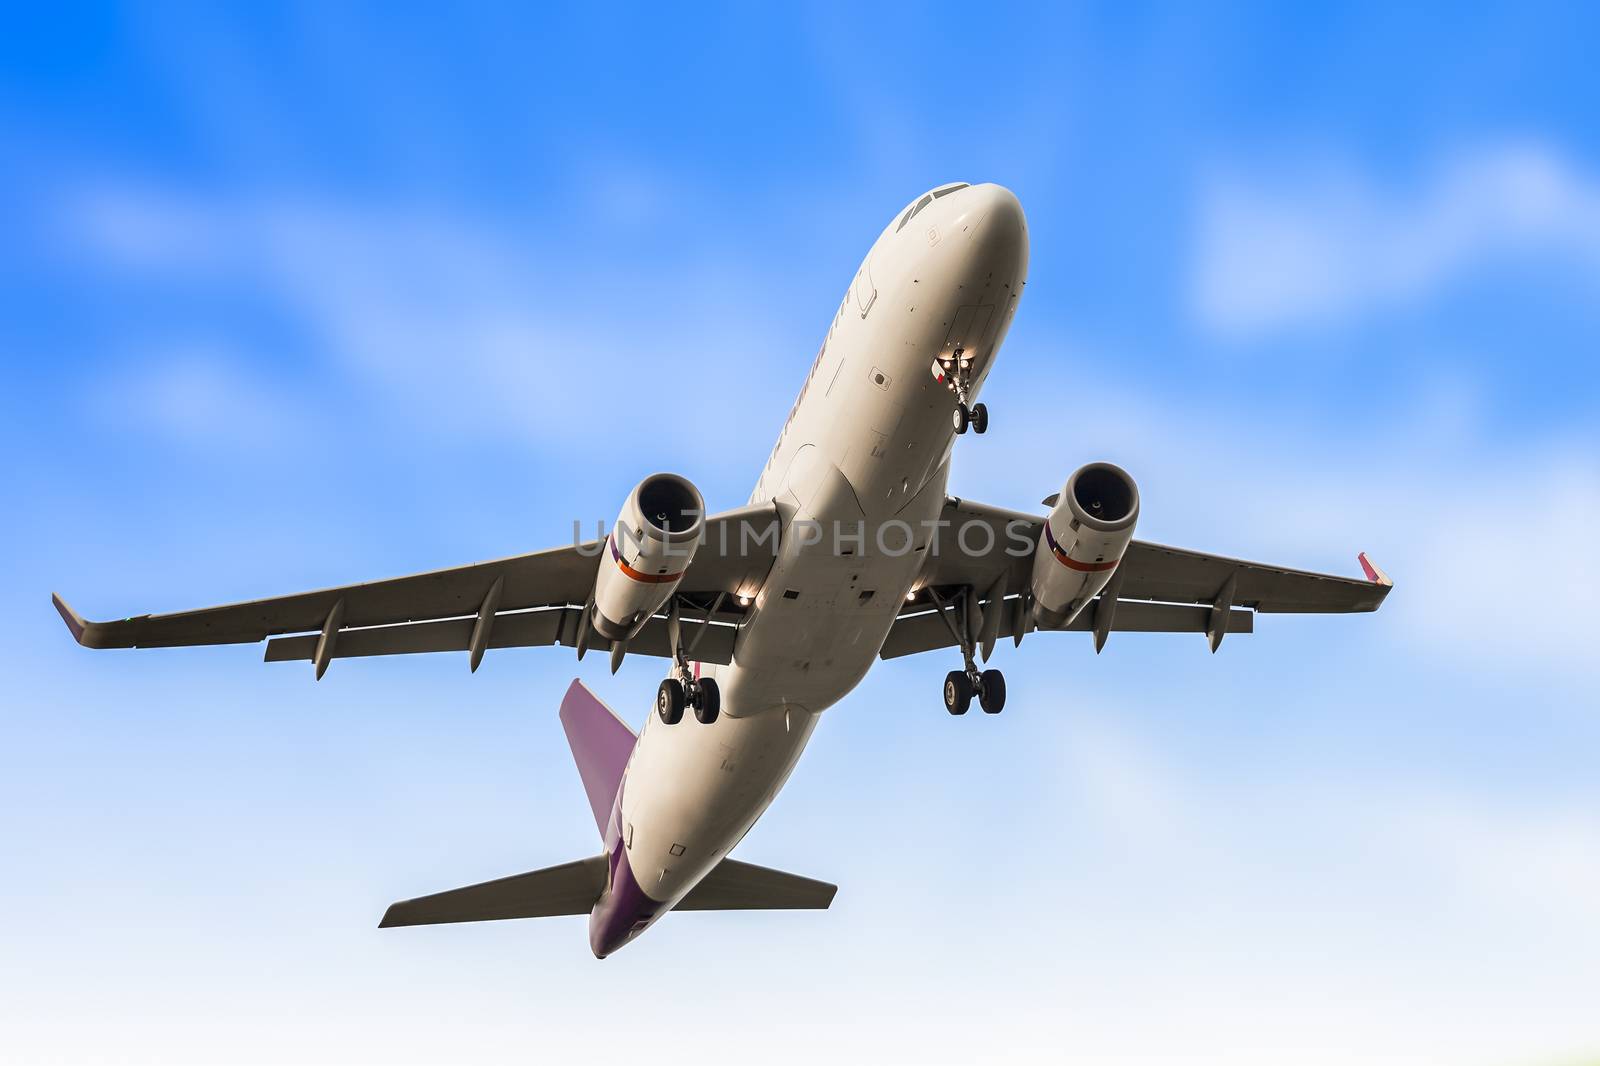 Passenger business airplane take off and flying in blue sky, use by FrameAngel